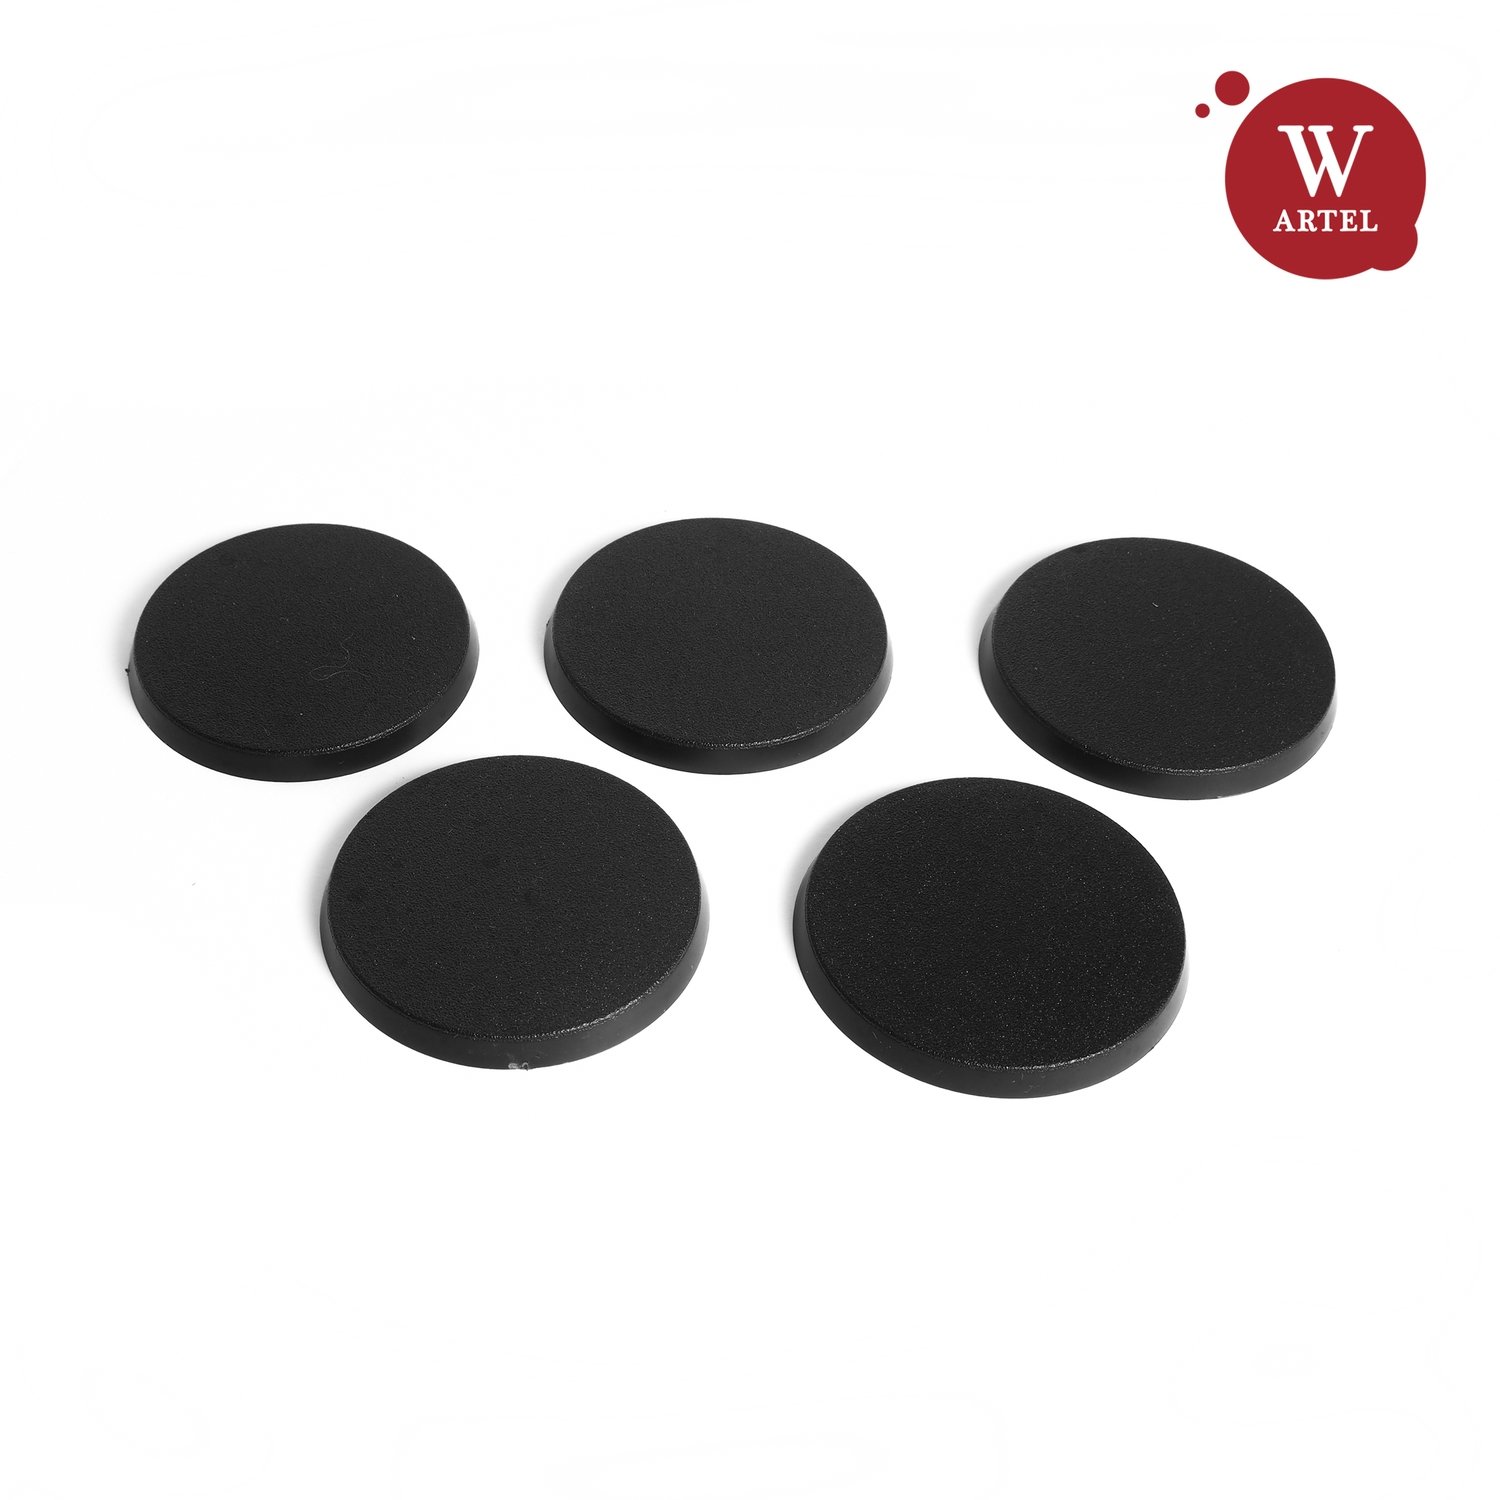 5x40mm round bases for miniatures